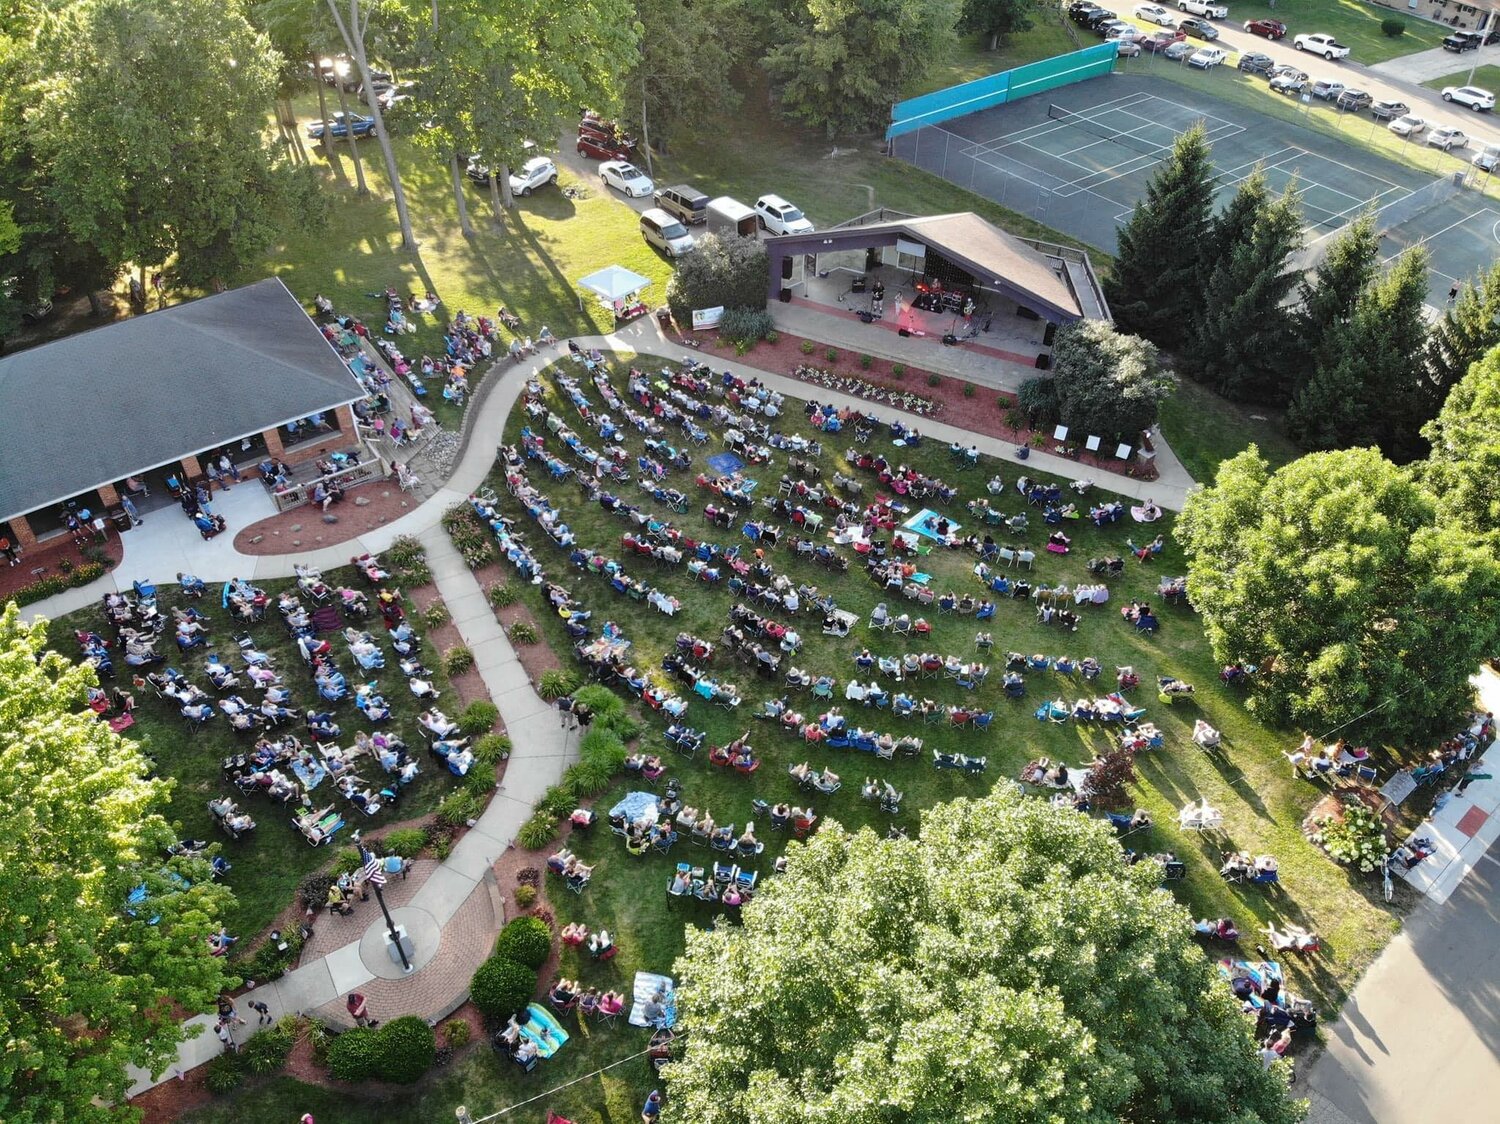 Free outdoor Wednesday evening concerts will be happening at St. Johns City Park this summer.